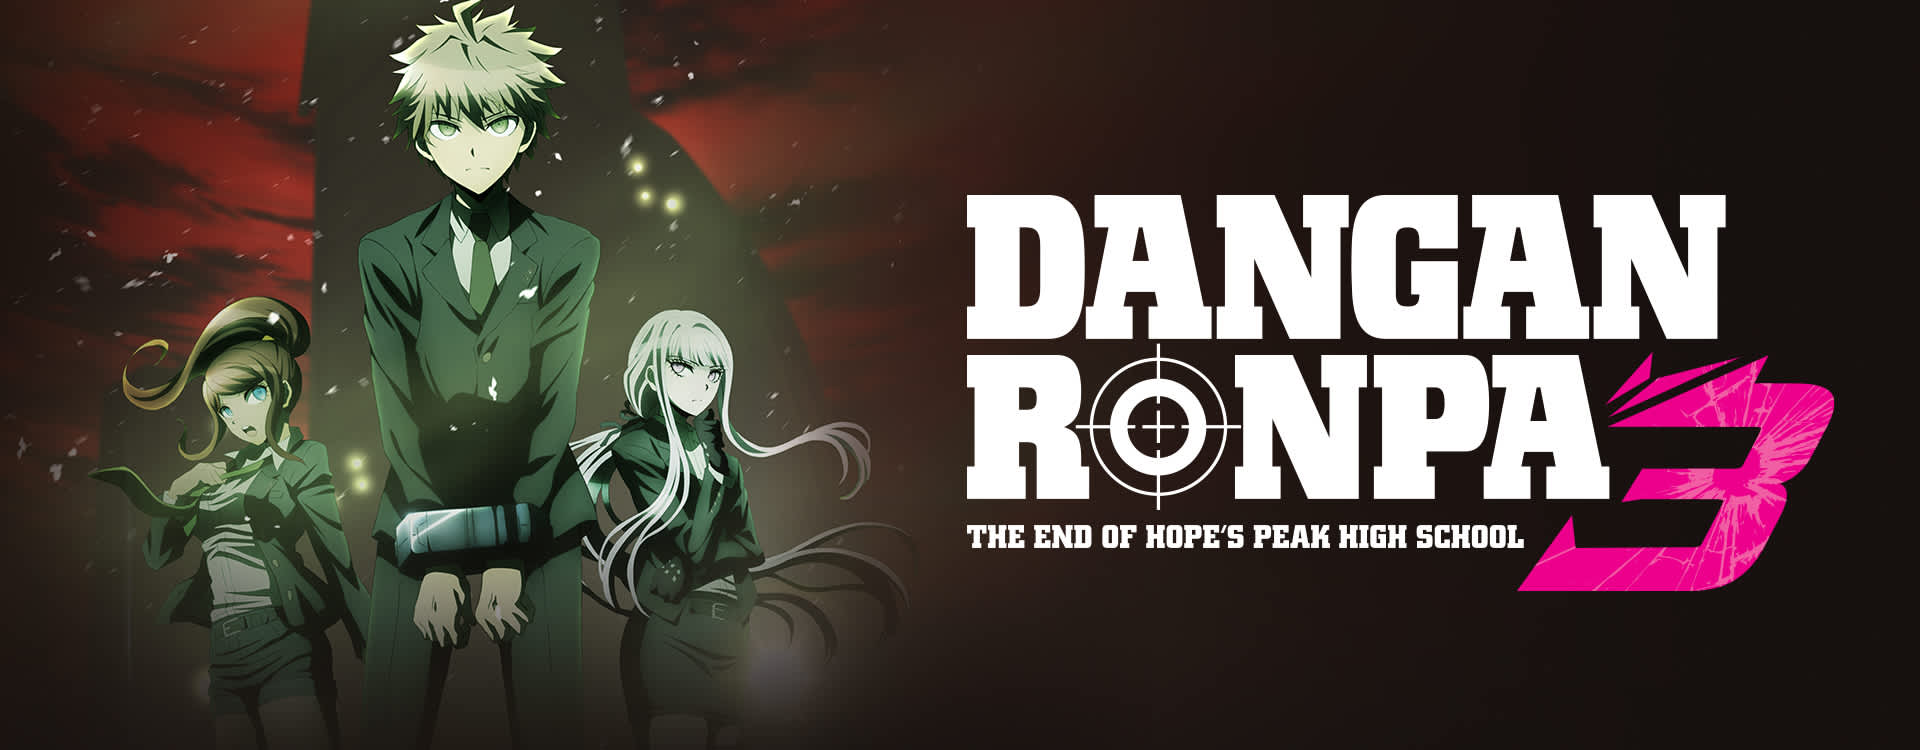 Danganronpa 3 Anime To Begin Airing In July, Will Feature Two Chapters -  Siliconera